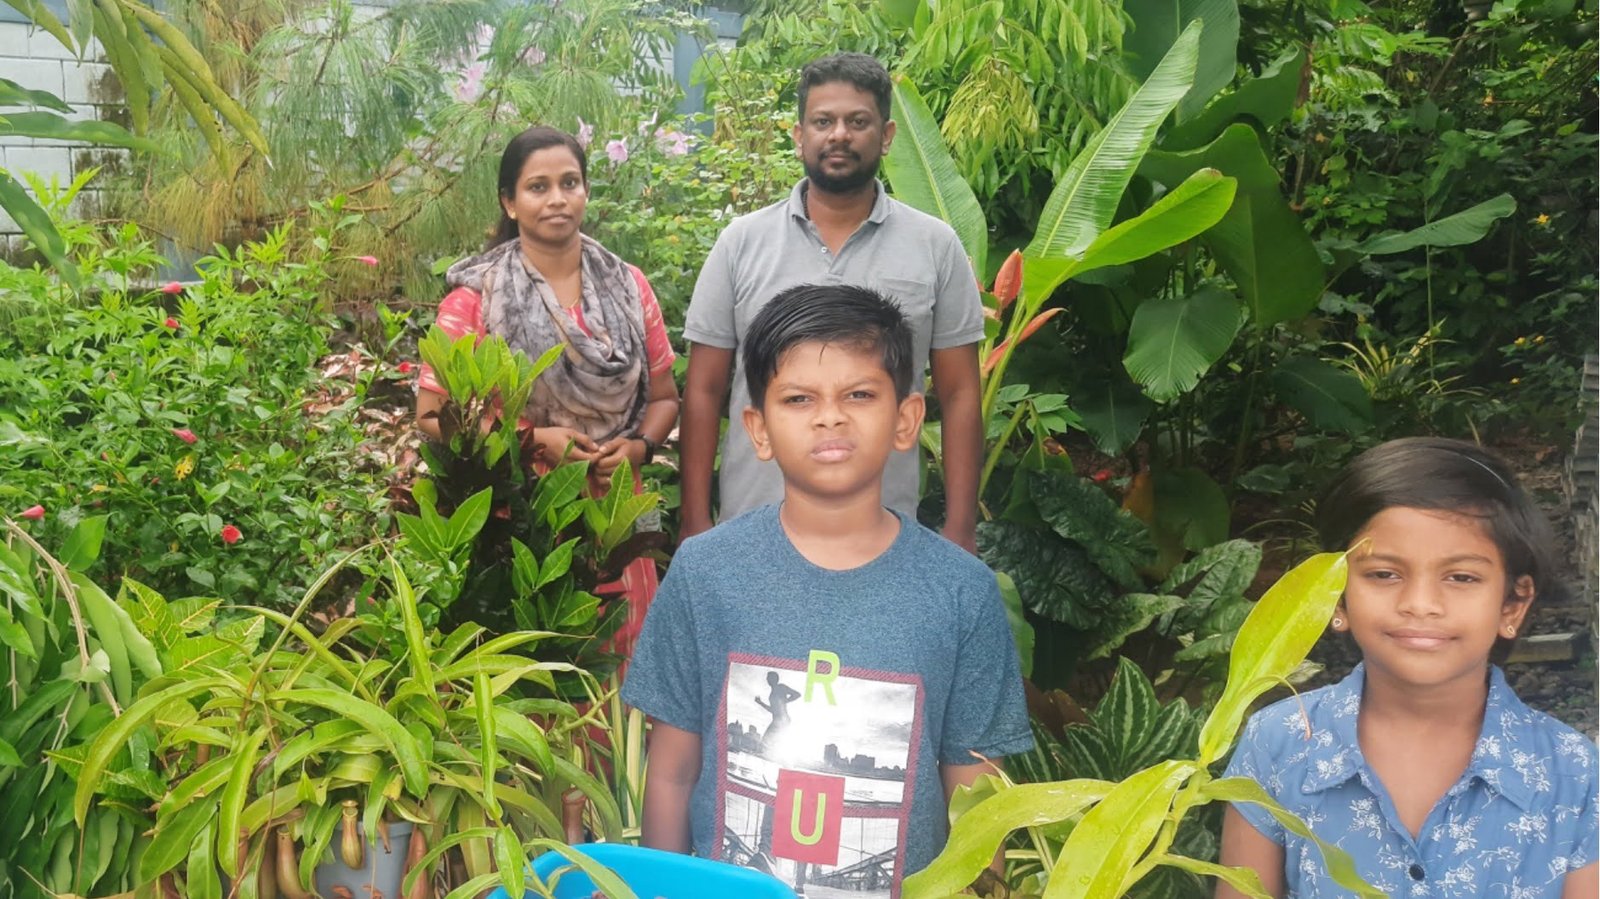 Ezekiel Poulose with his wife and children at his farm in Chottanikkara, Kerala